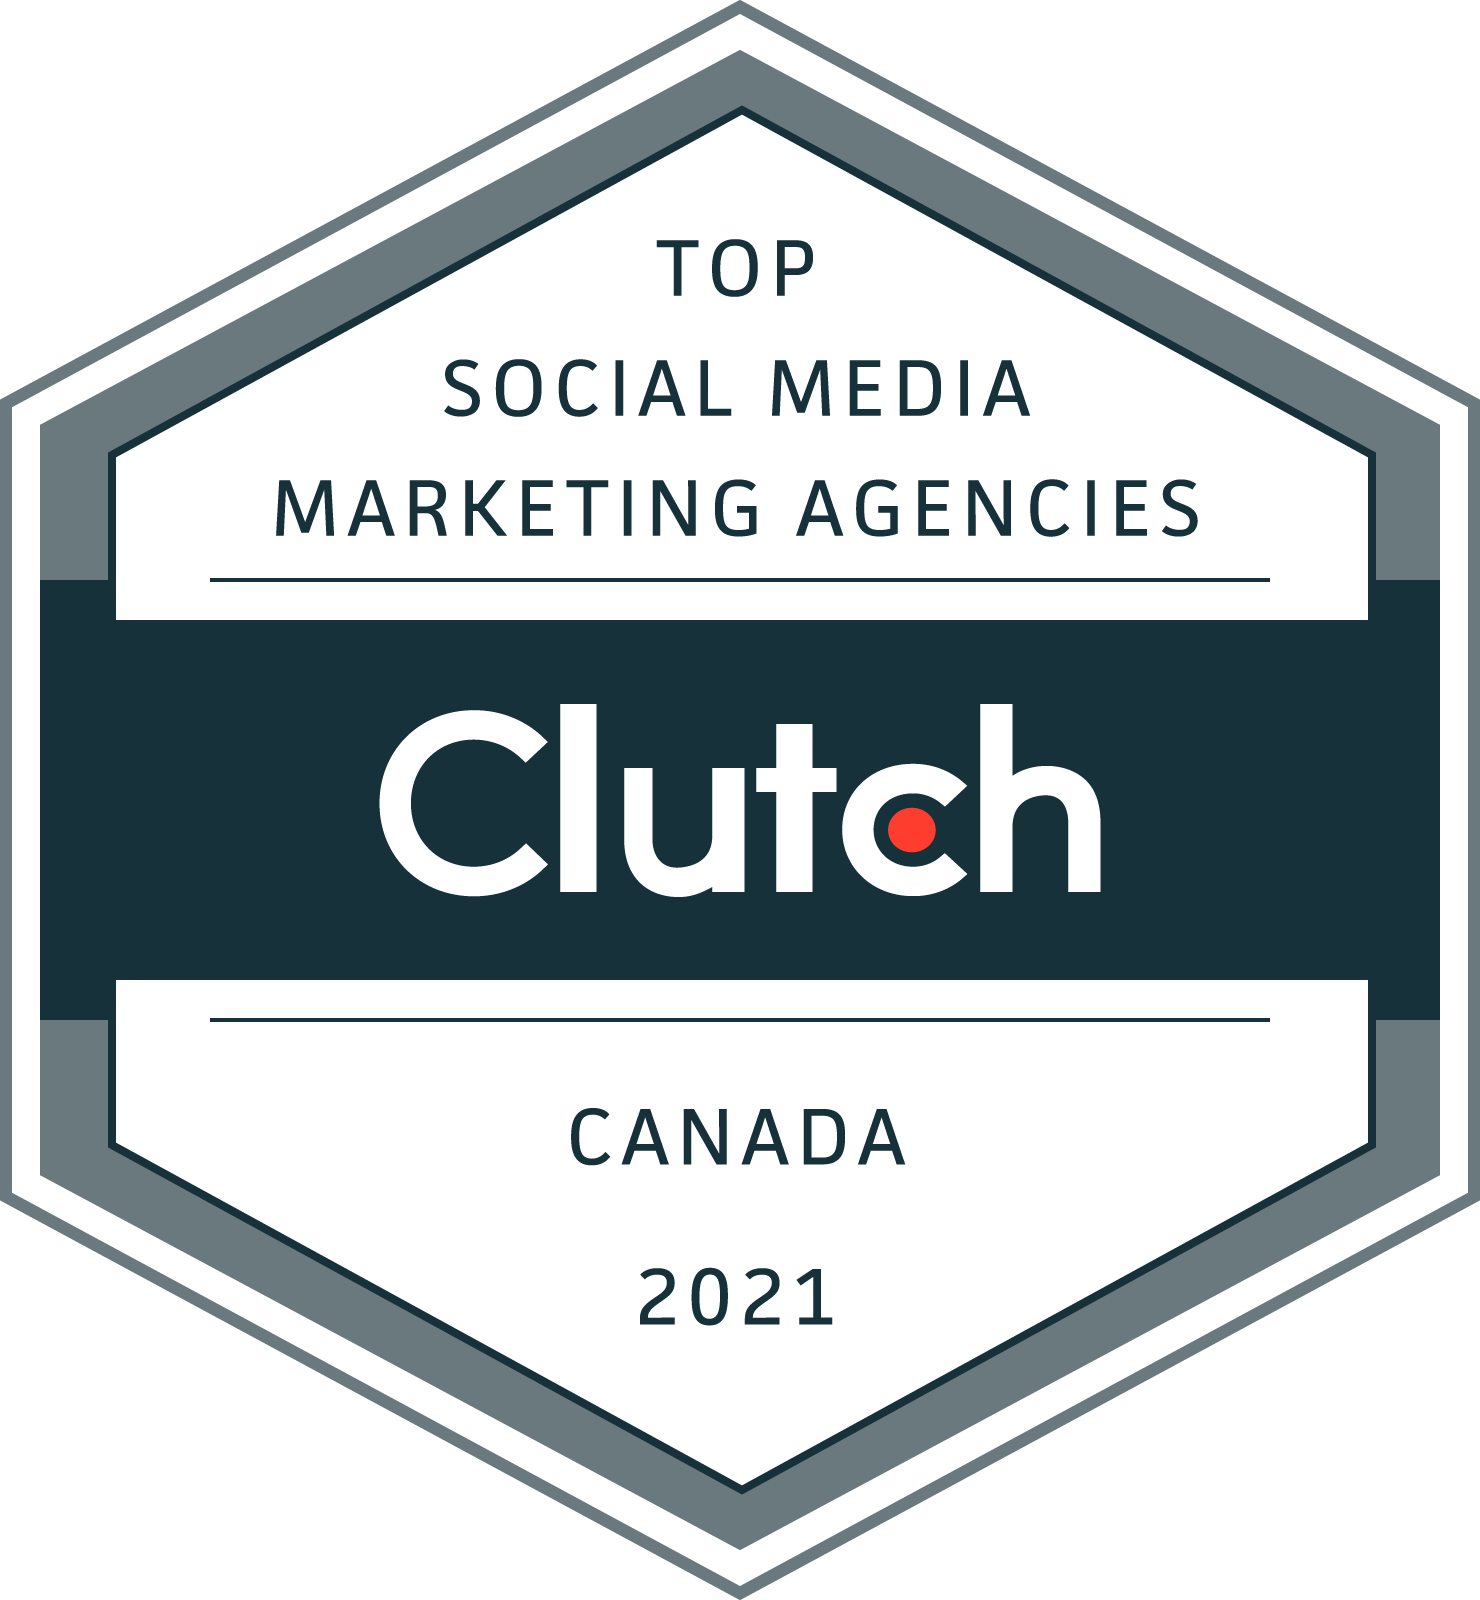 Clutch Names Tangible Words as a Top Advertising & Marketing Agency